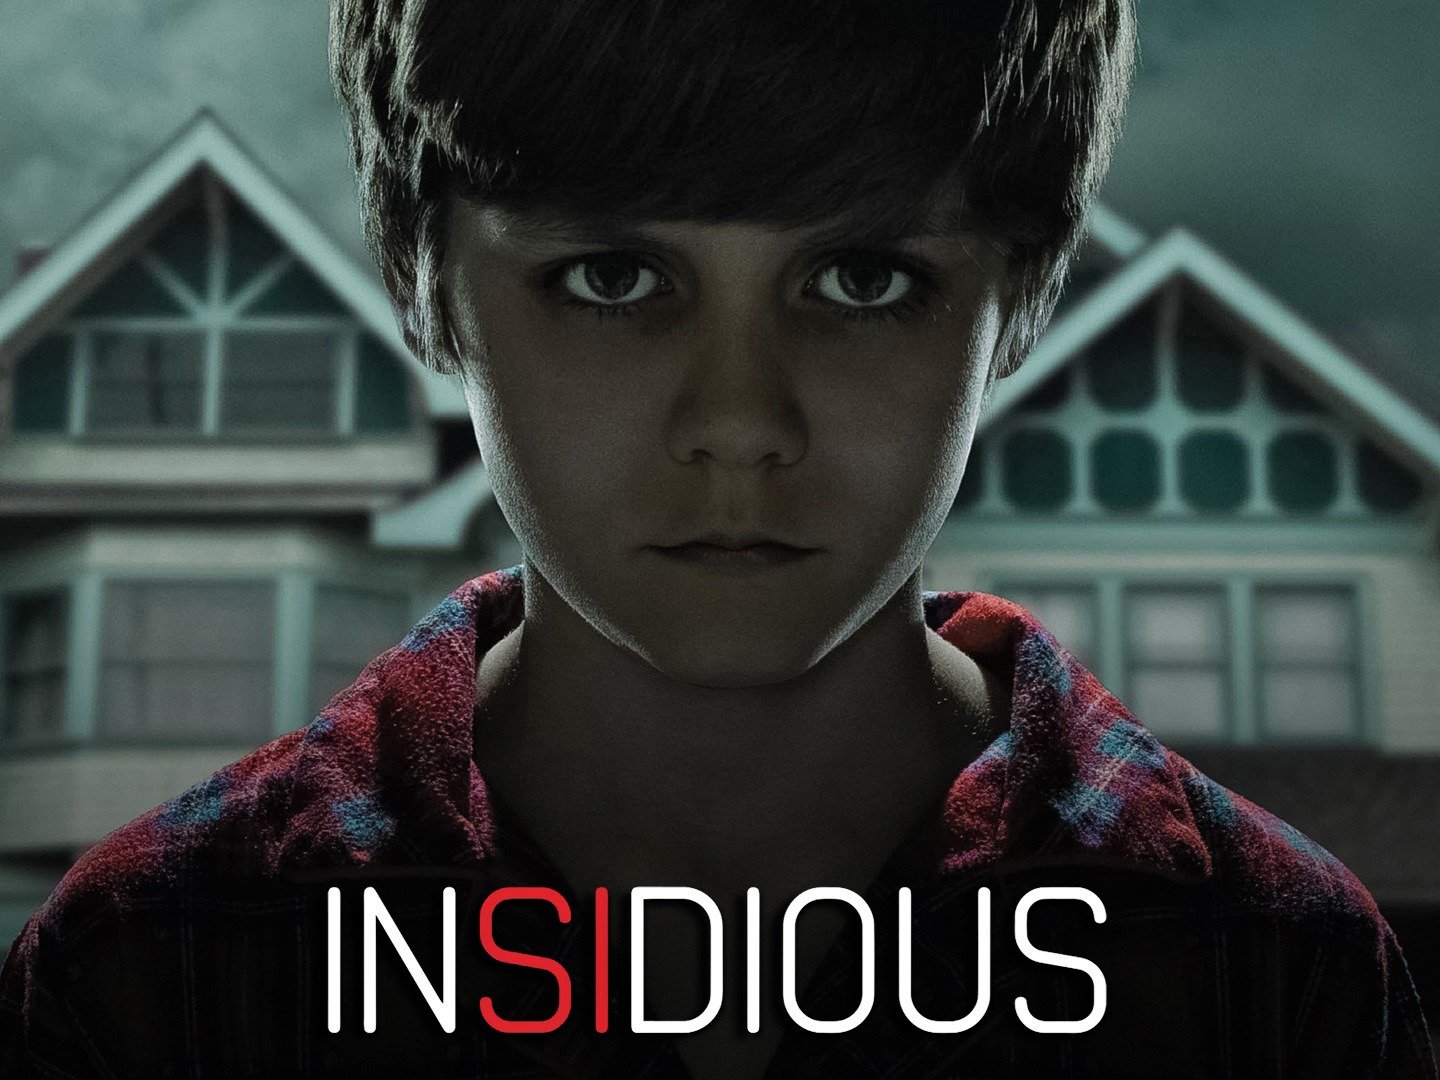 Insidious Trailer 1 Trailers & Videos Rotten Tomatoes